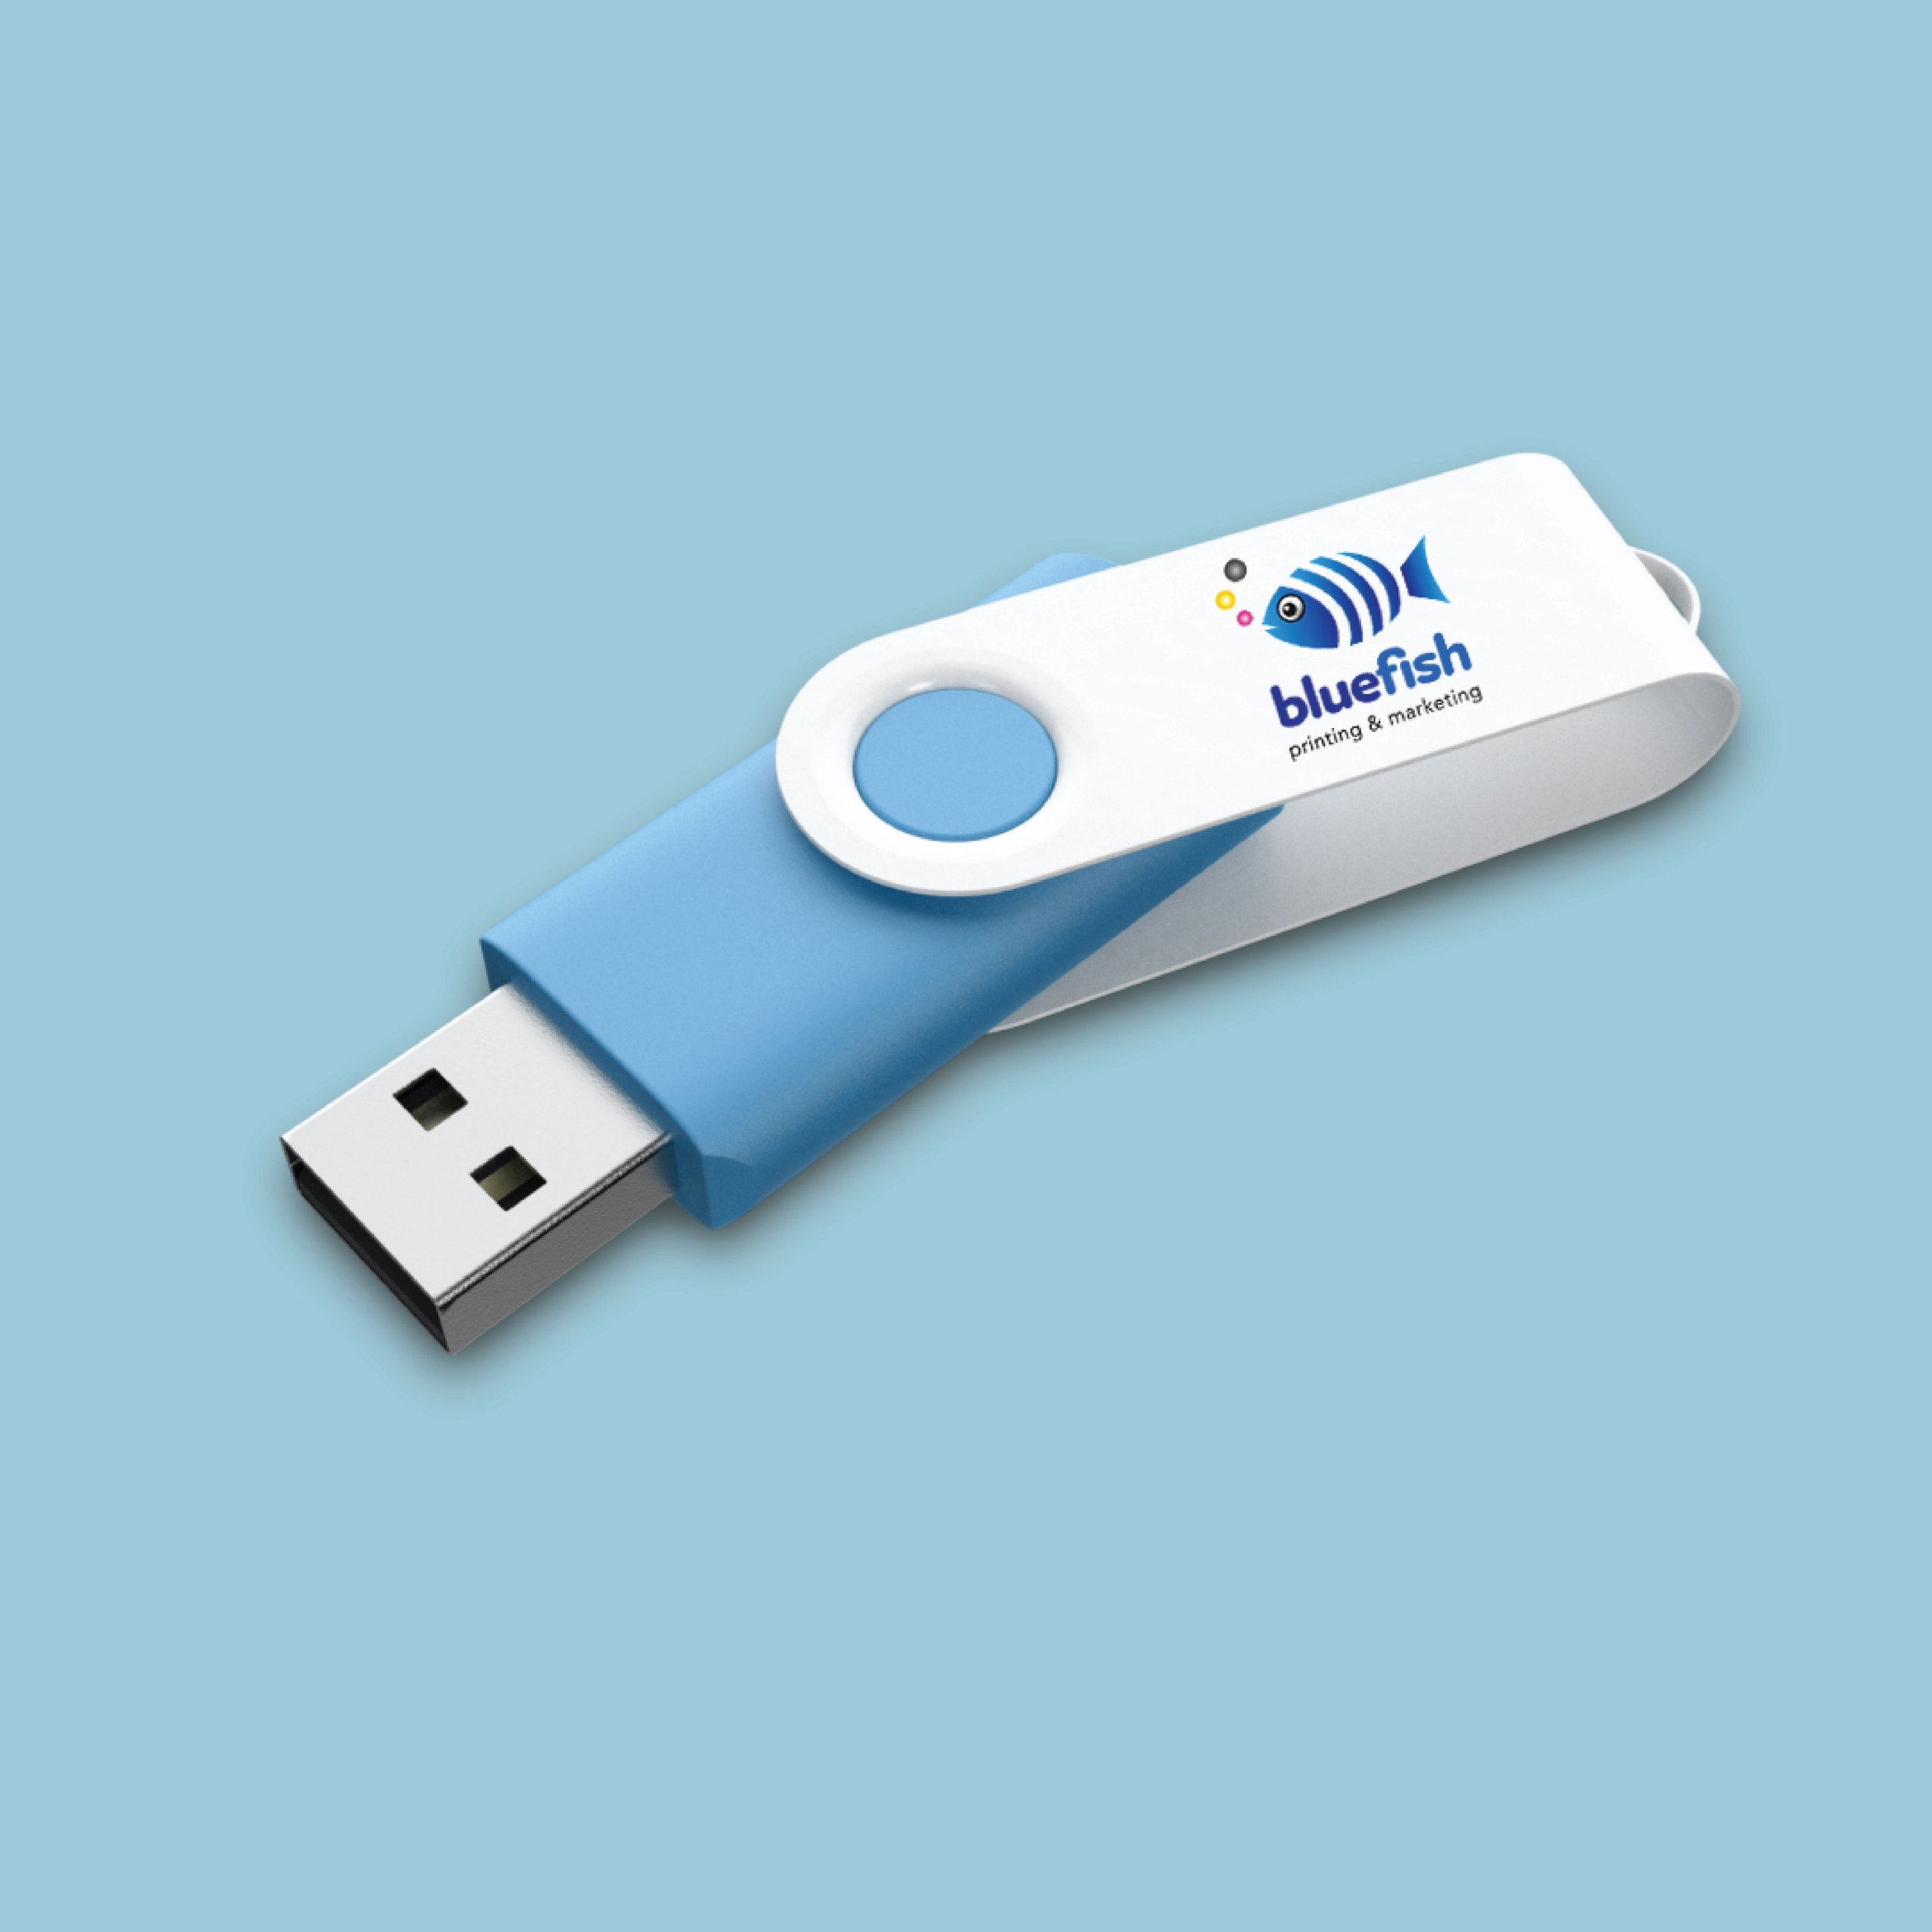 promo products-06.jpg